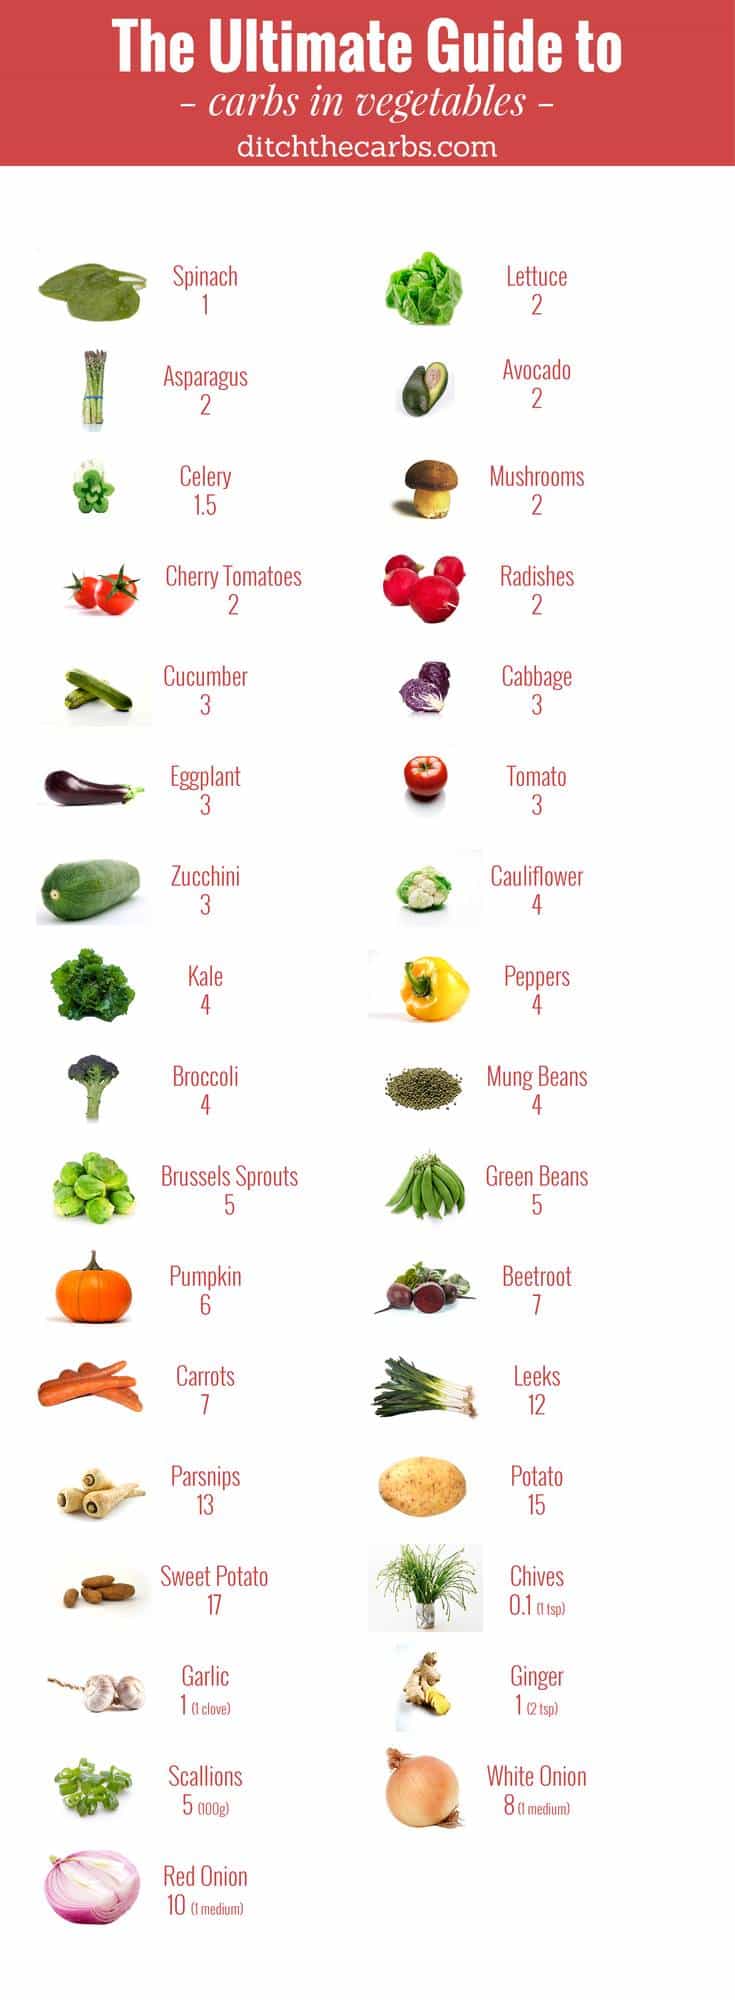 chart showing the carbs in vegetables per 100g